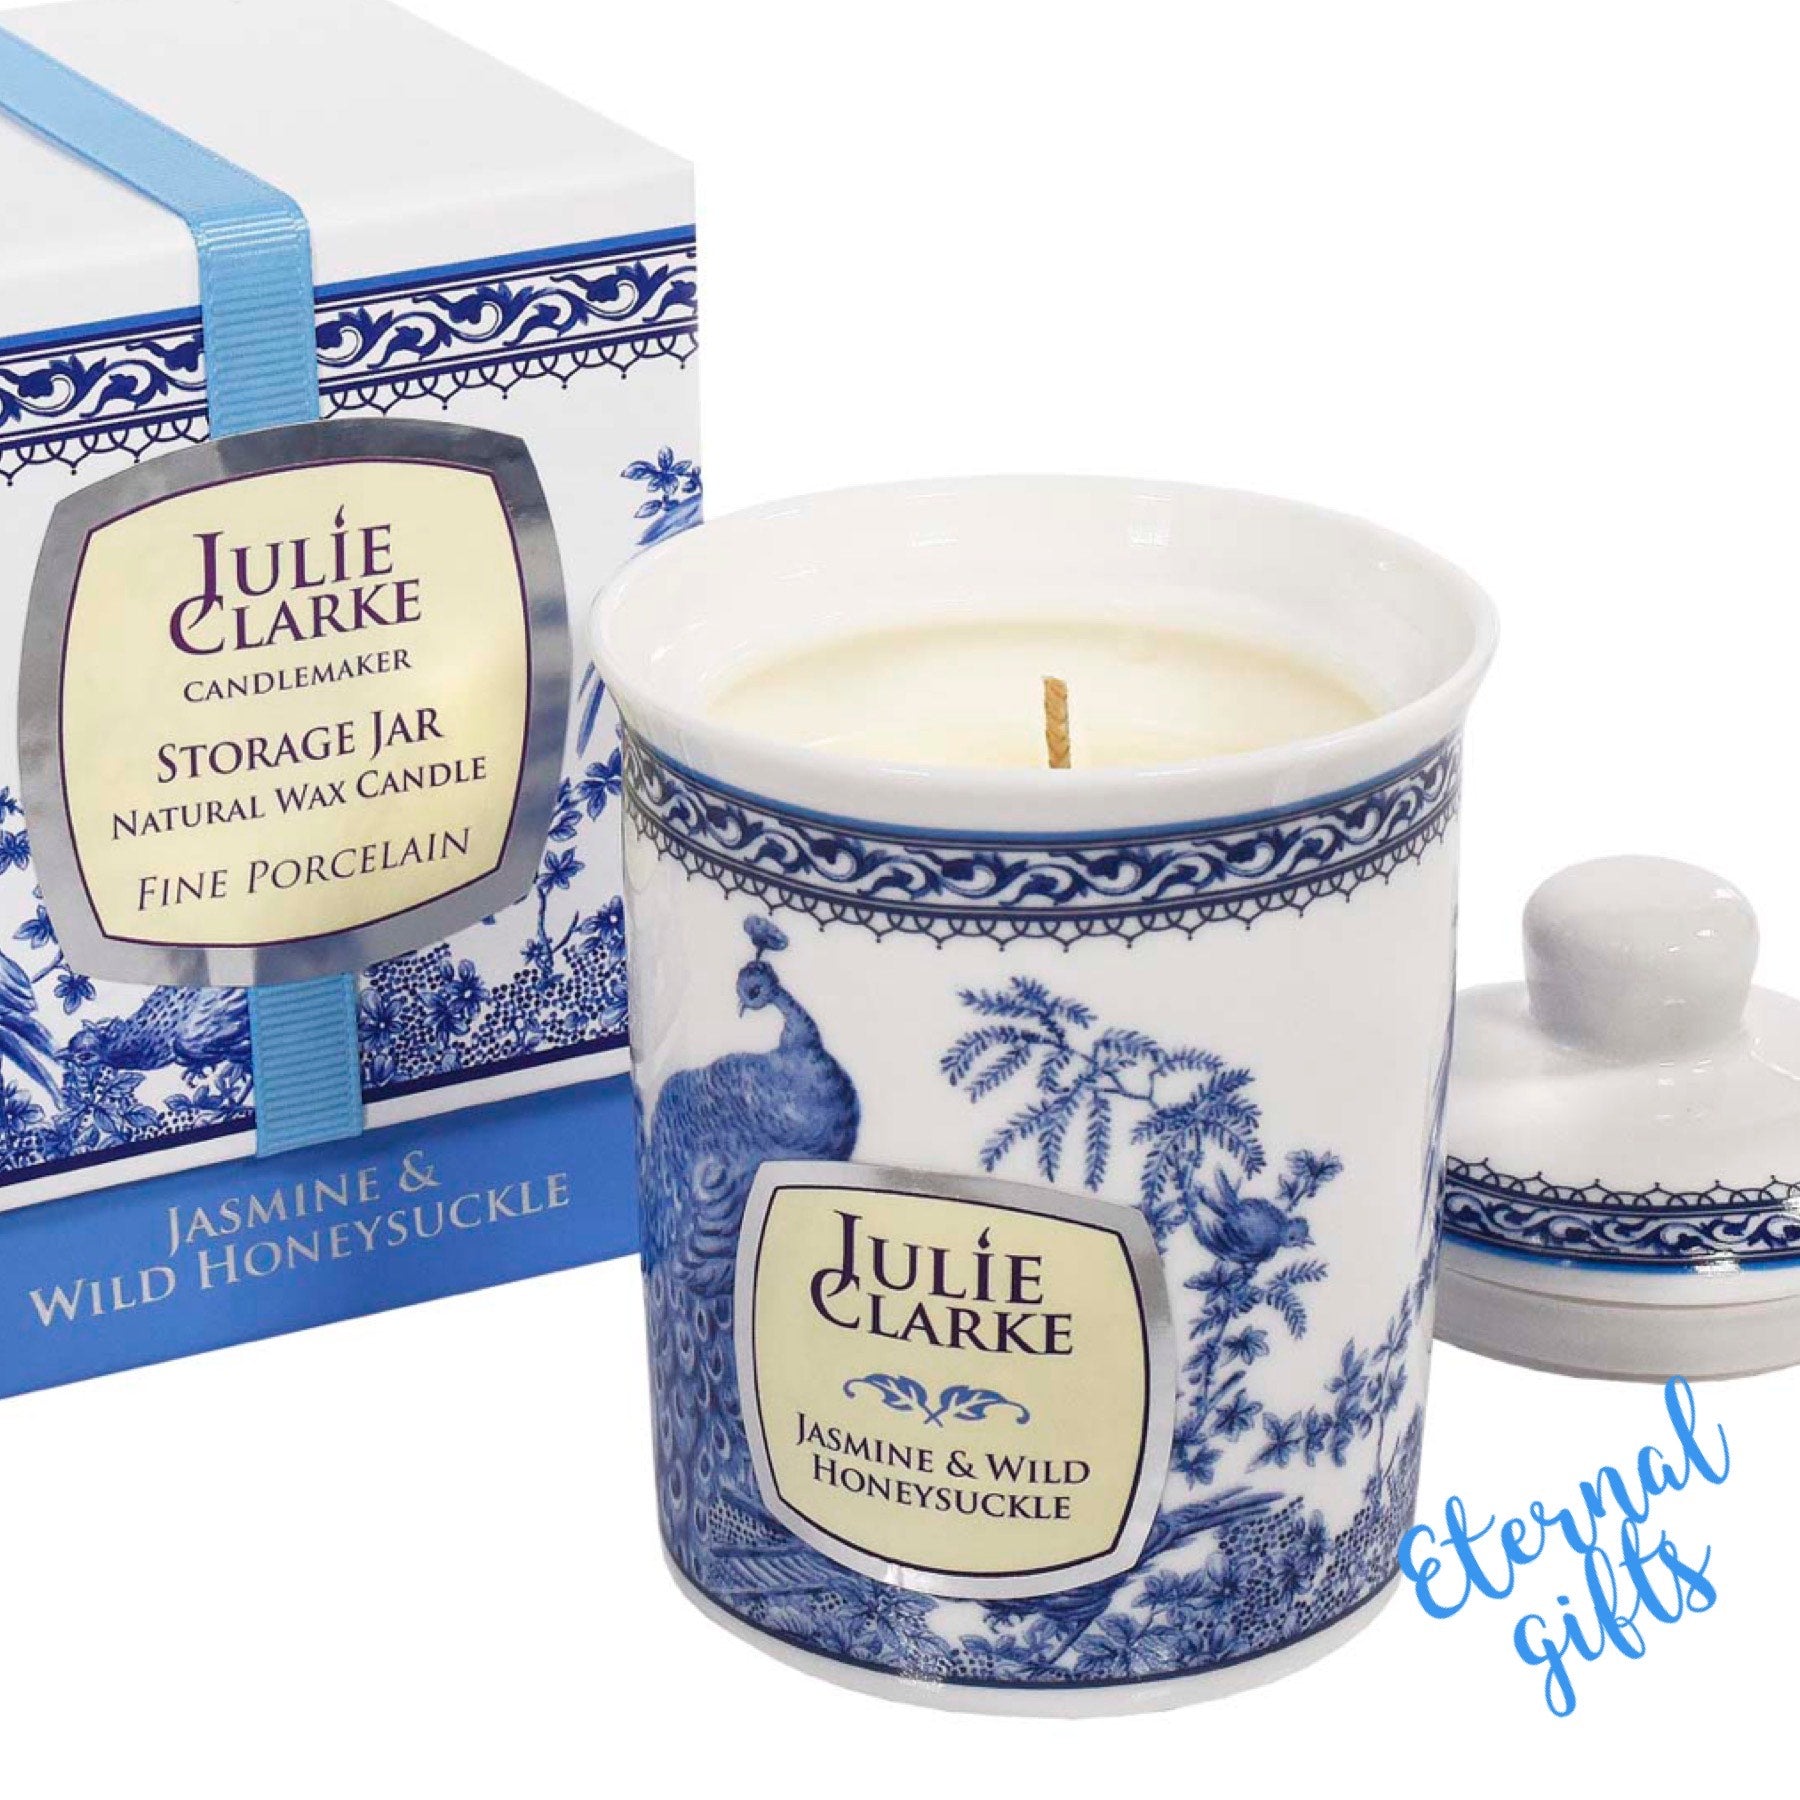 Jasmine and Wild Honeysuckle Candle - Julie Clarke Peacock Collection